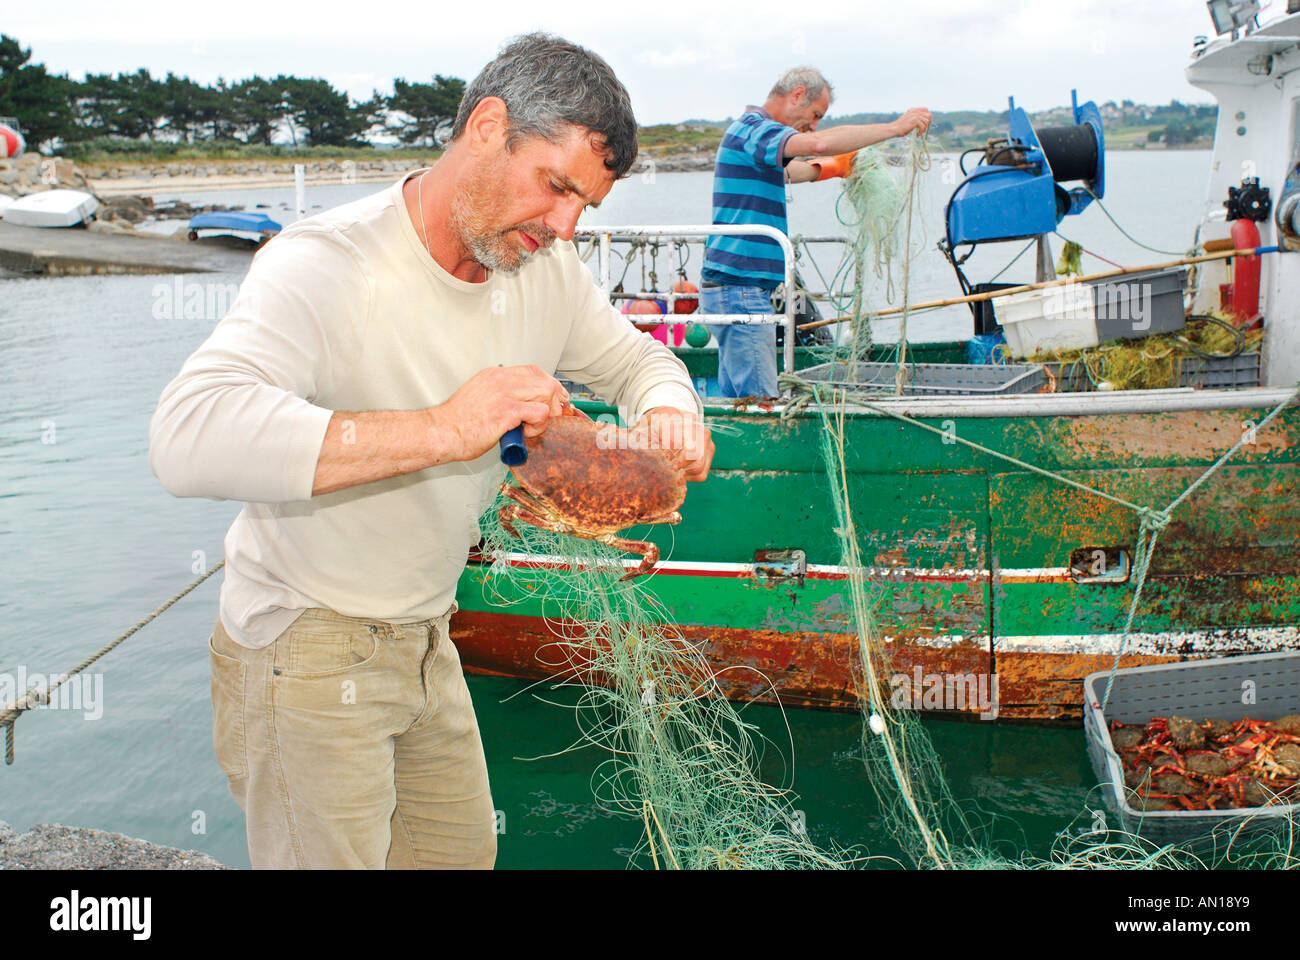 Fisherman taking crab out of net, Harbour of St Sauveur, Ile Grande, Brittany, France Stock Photo